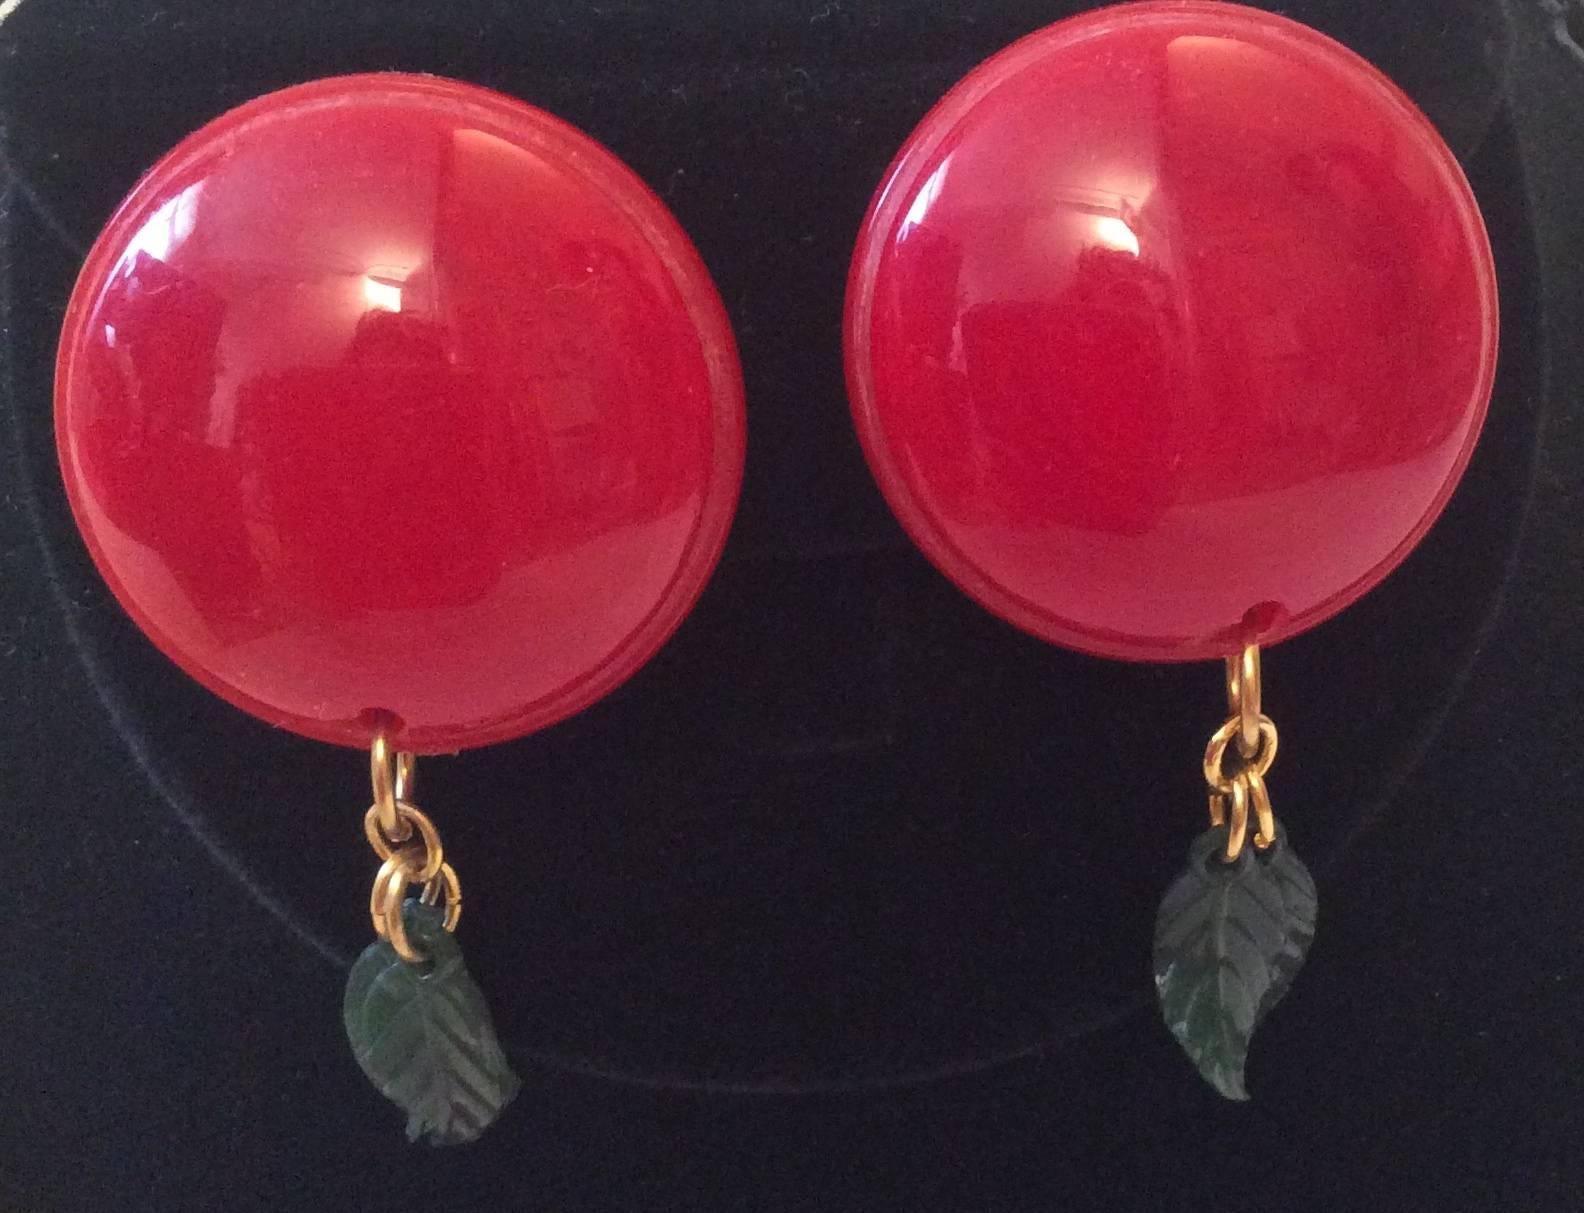 Presented here is a beautiful Jan Carlin cherry bakelite necklace with matching clip earrings. The cherries on the earrings and on the bracelet each measure 1.5 inches in diameter. The earrings and the necklace are both signed 'Jan Carlin.' The